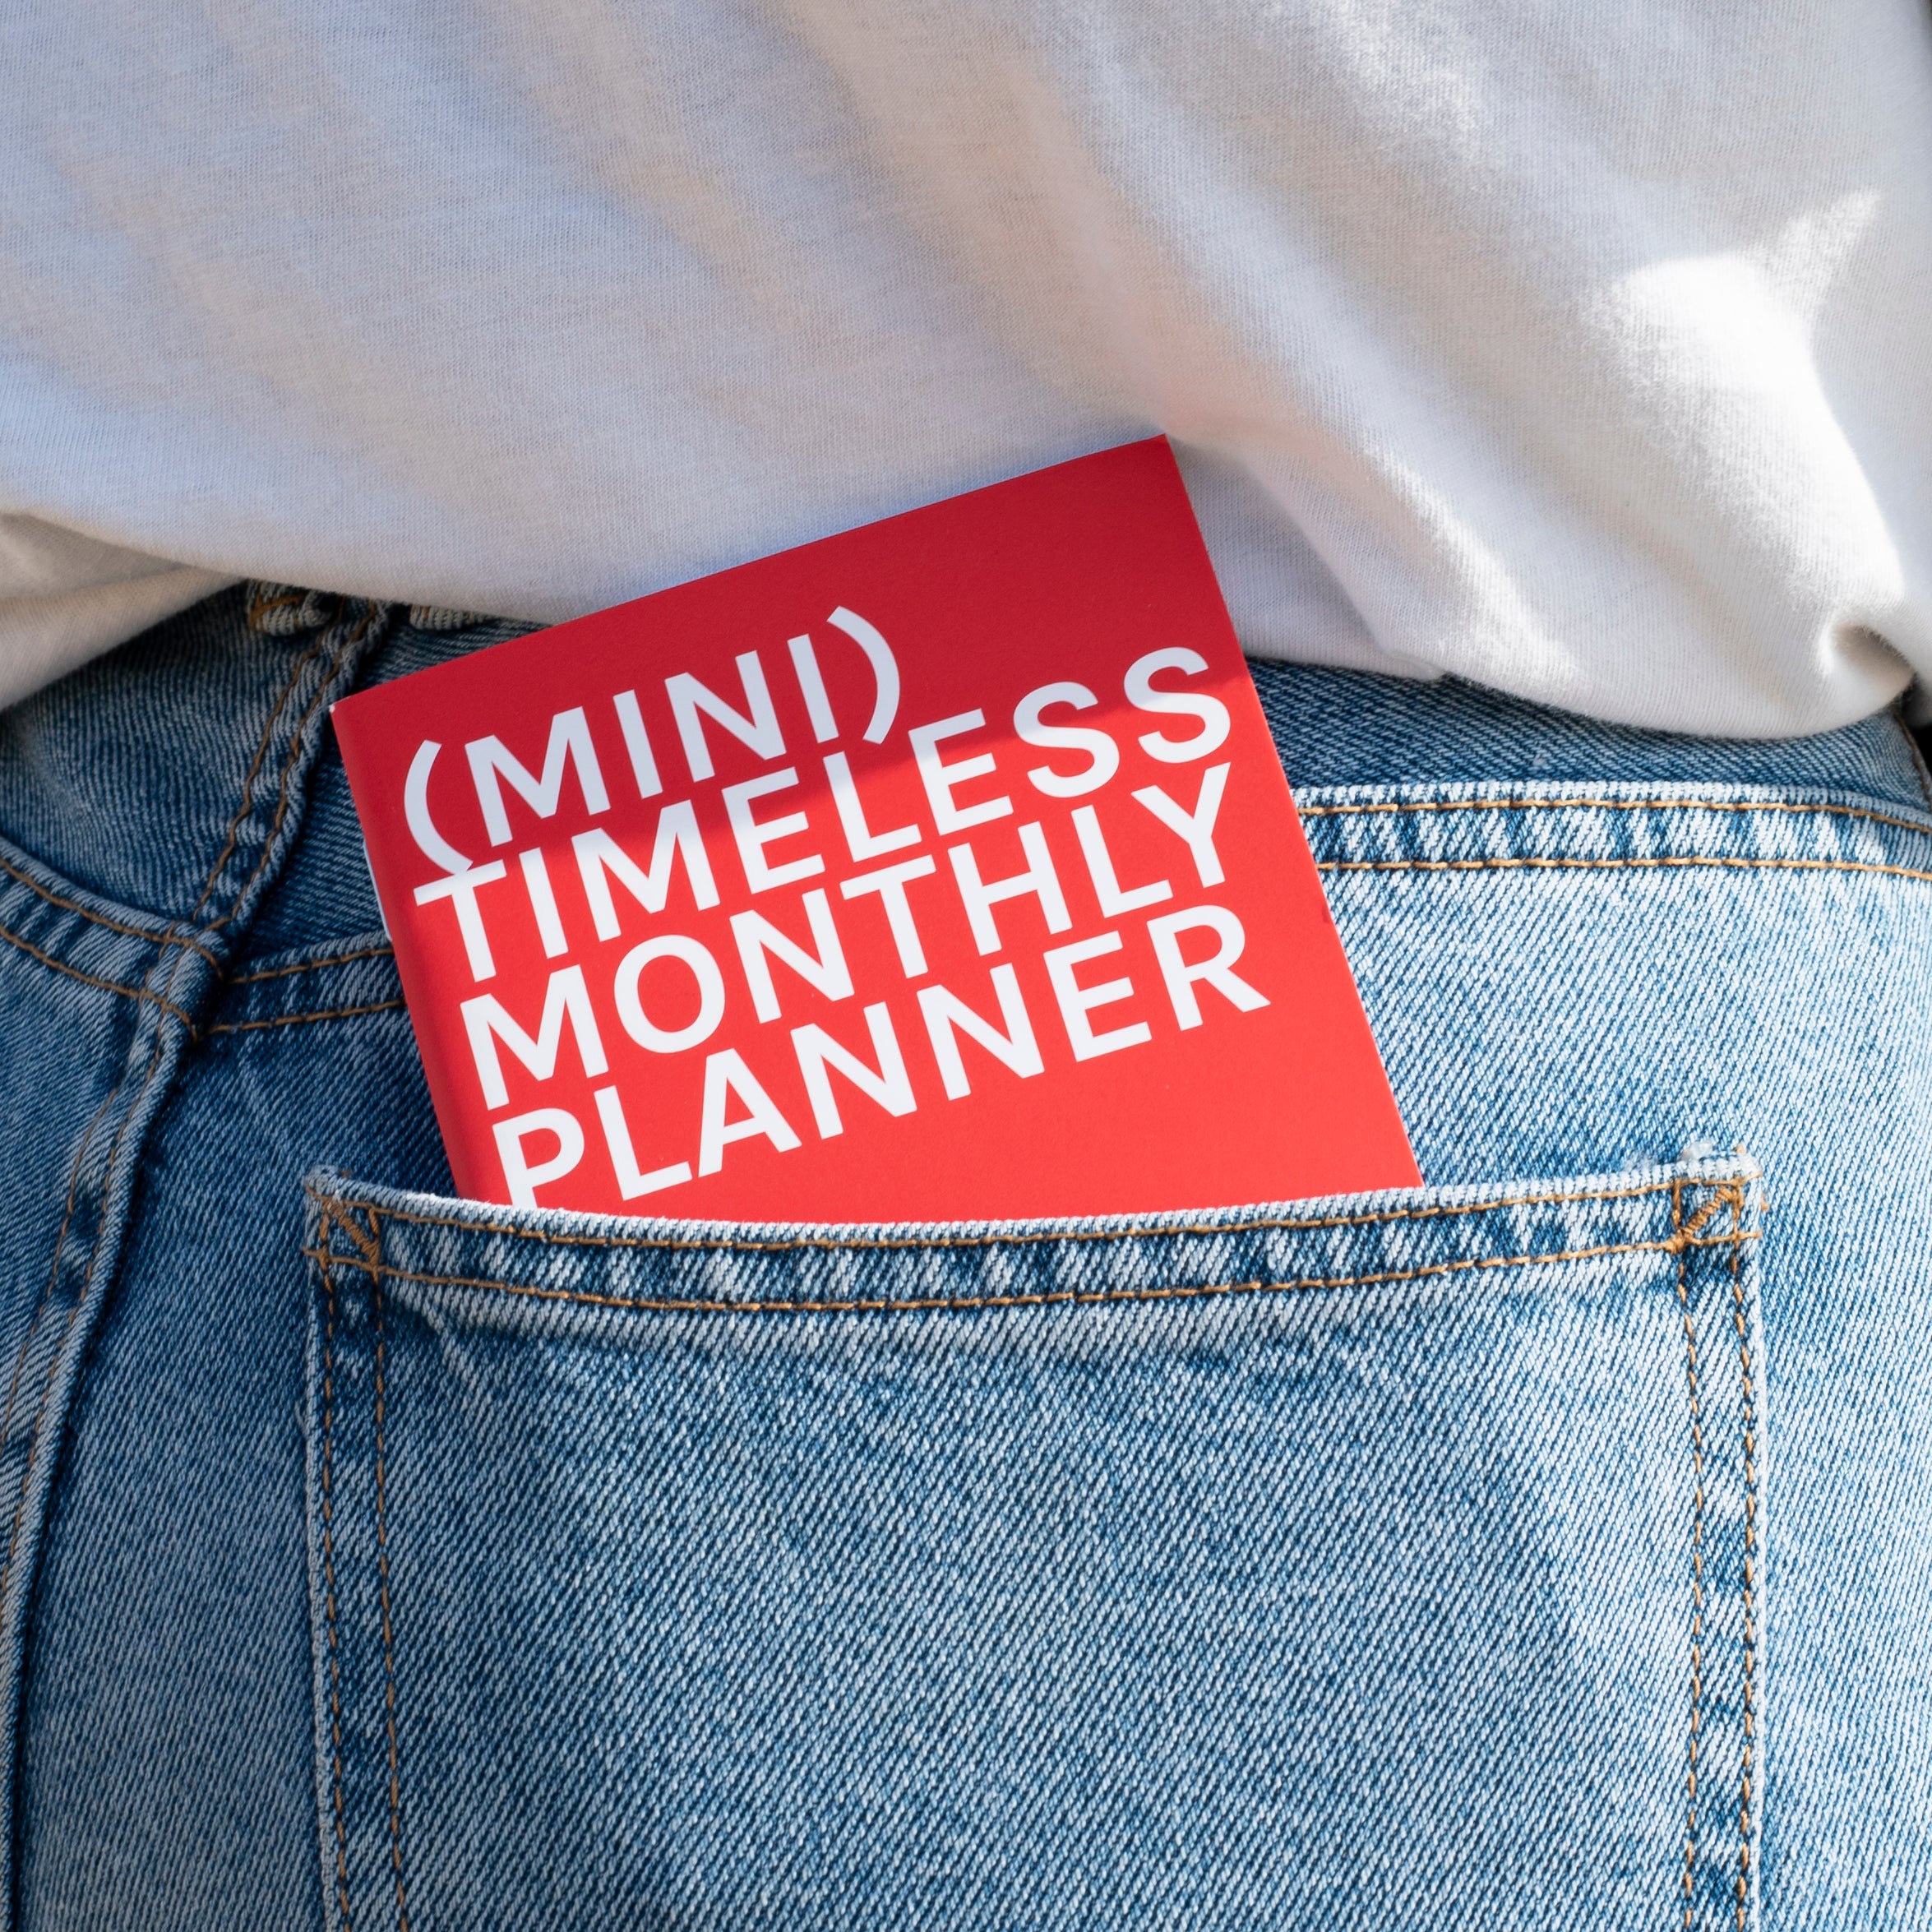 OCTÀGON DESIGN | "Mini Monthly Planner | Similar A6 Size" timeless monthly planner, red color, white typography.